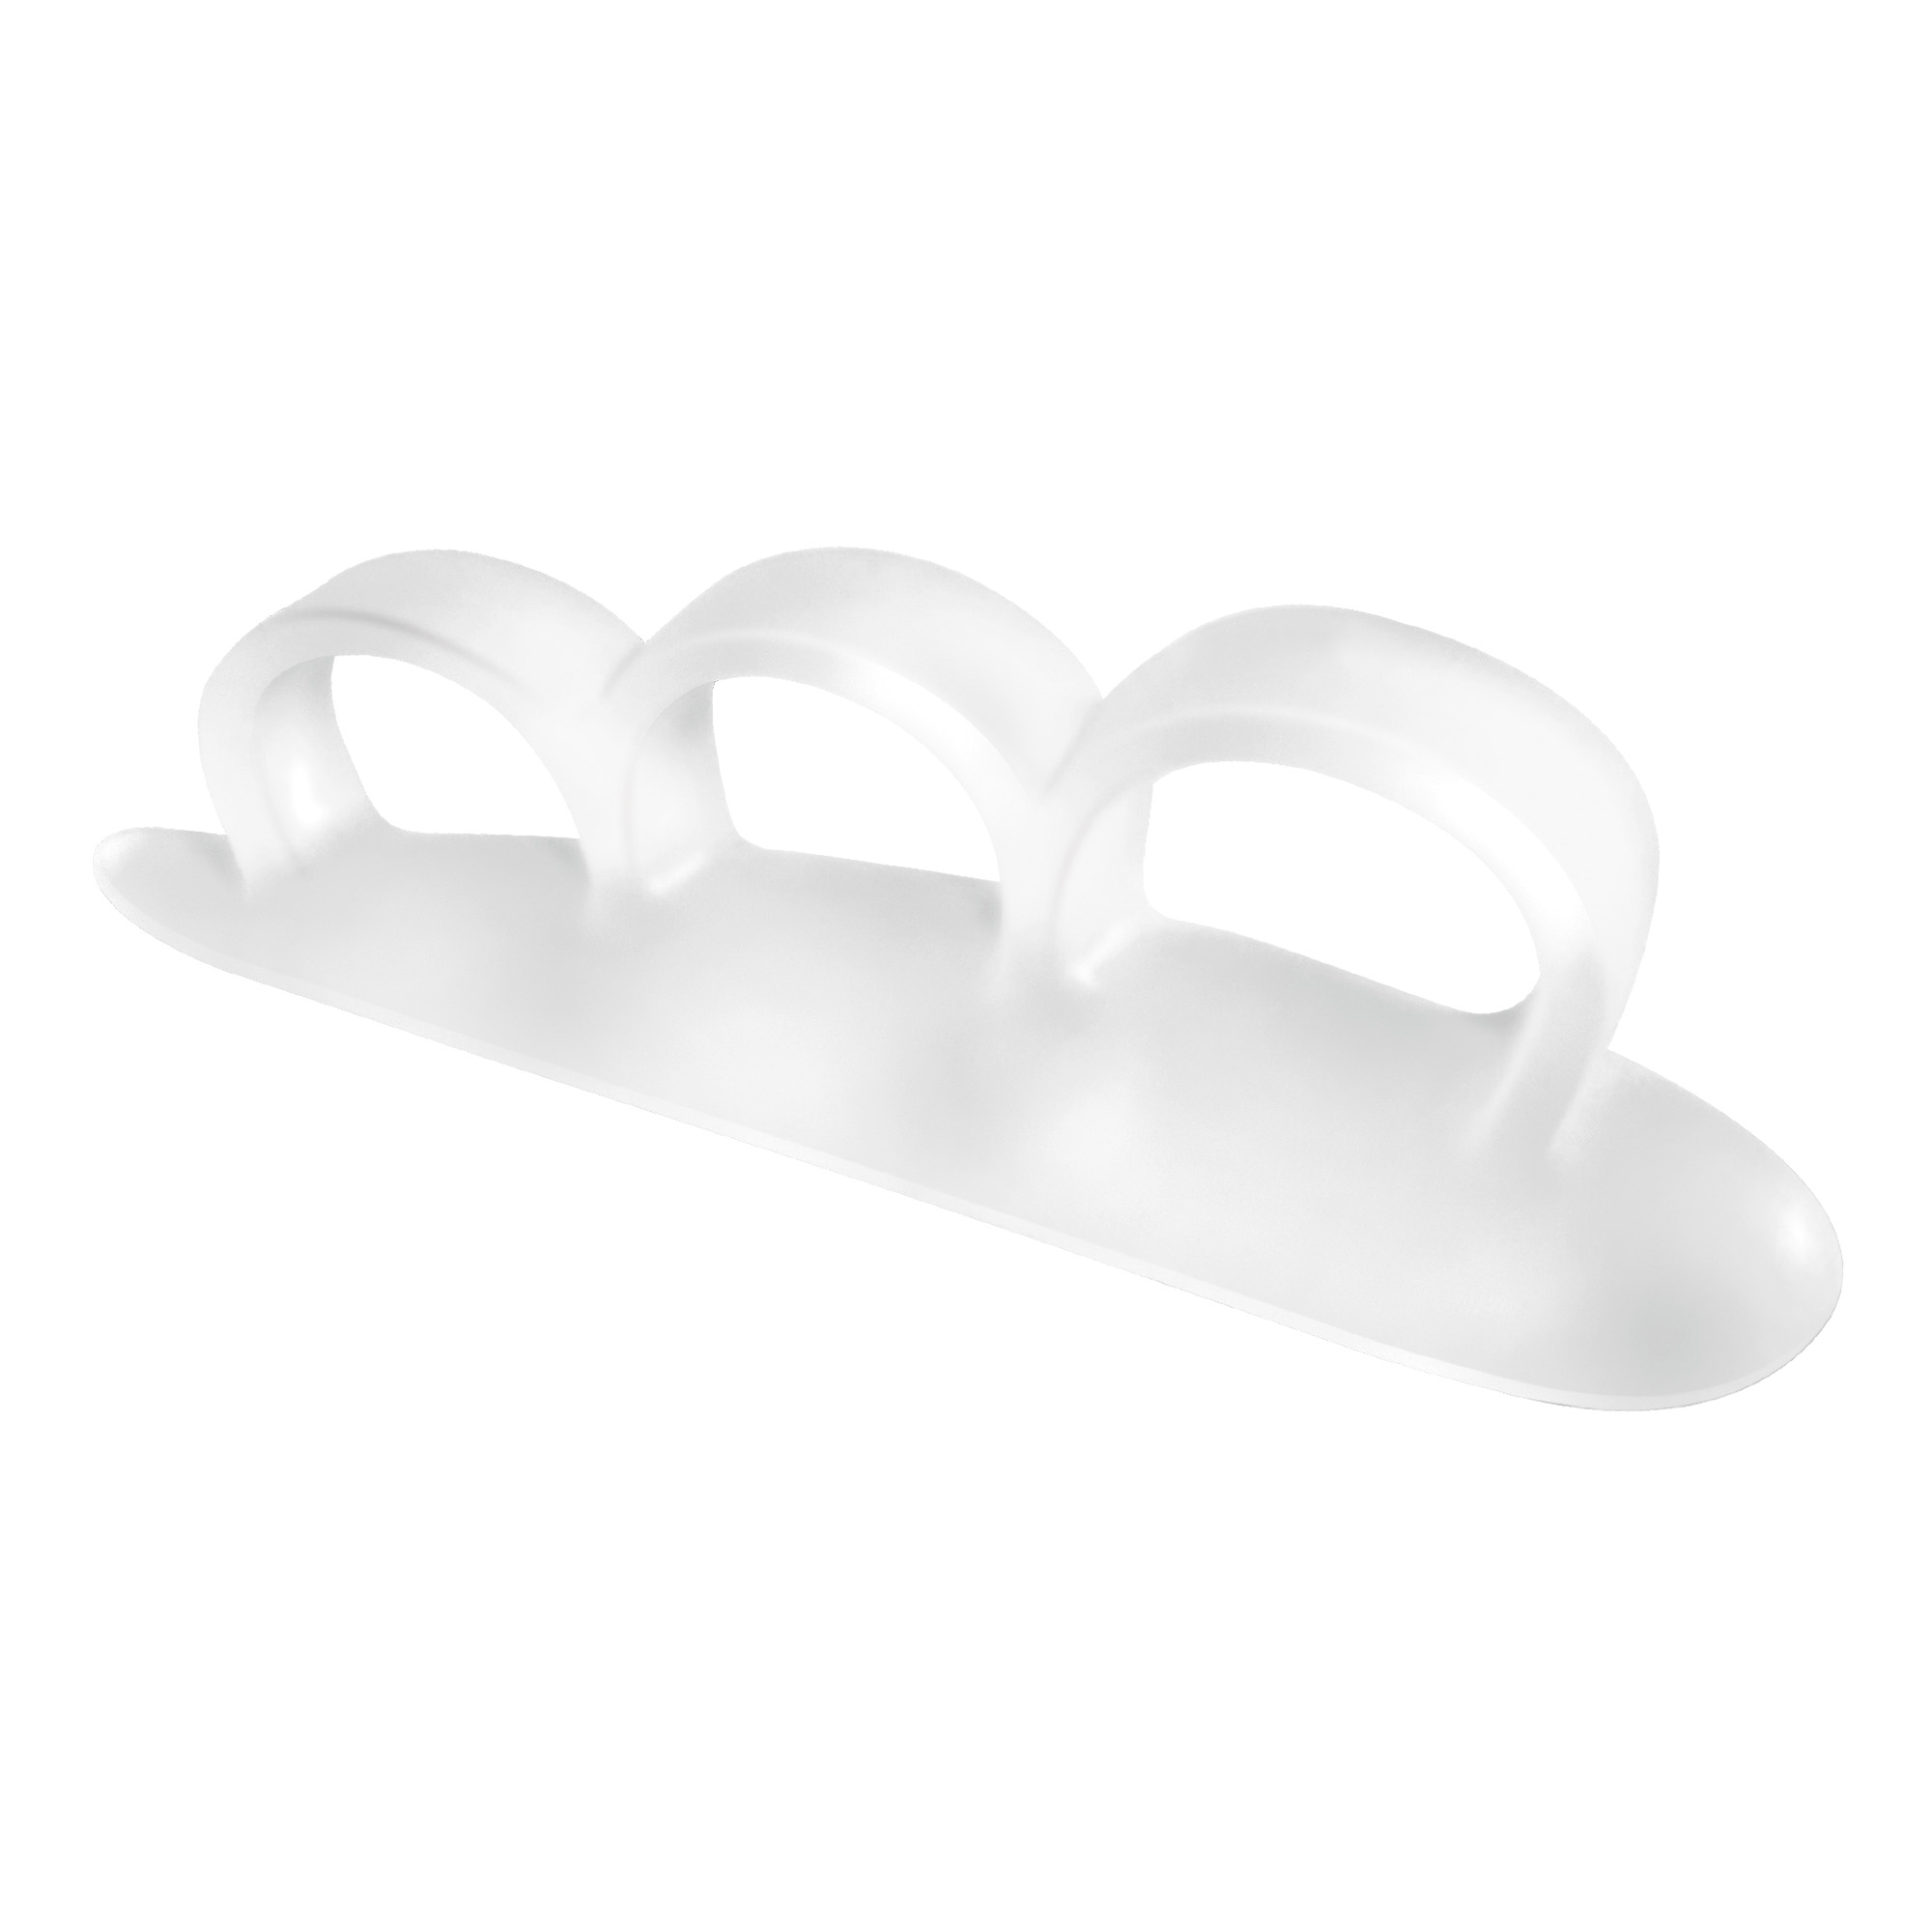 Gel cushion with toe rings - size Medium/Large for right foot 1 pc